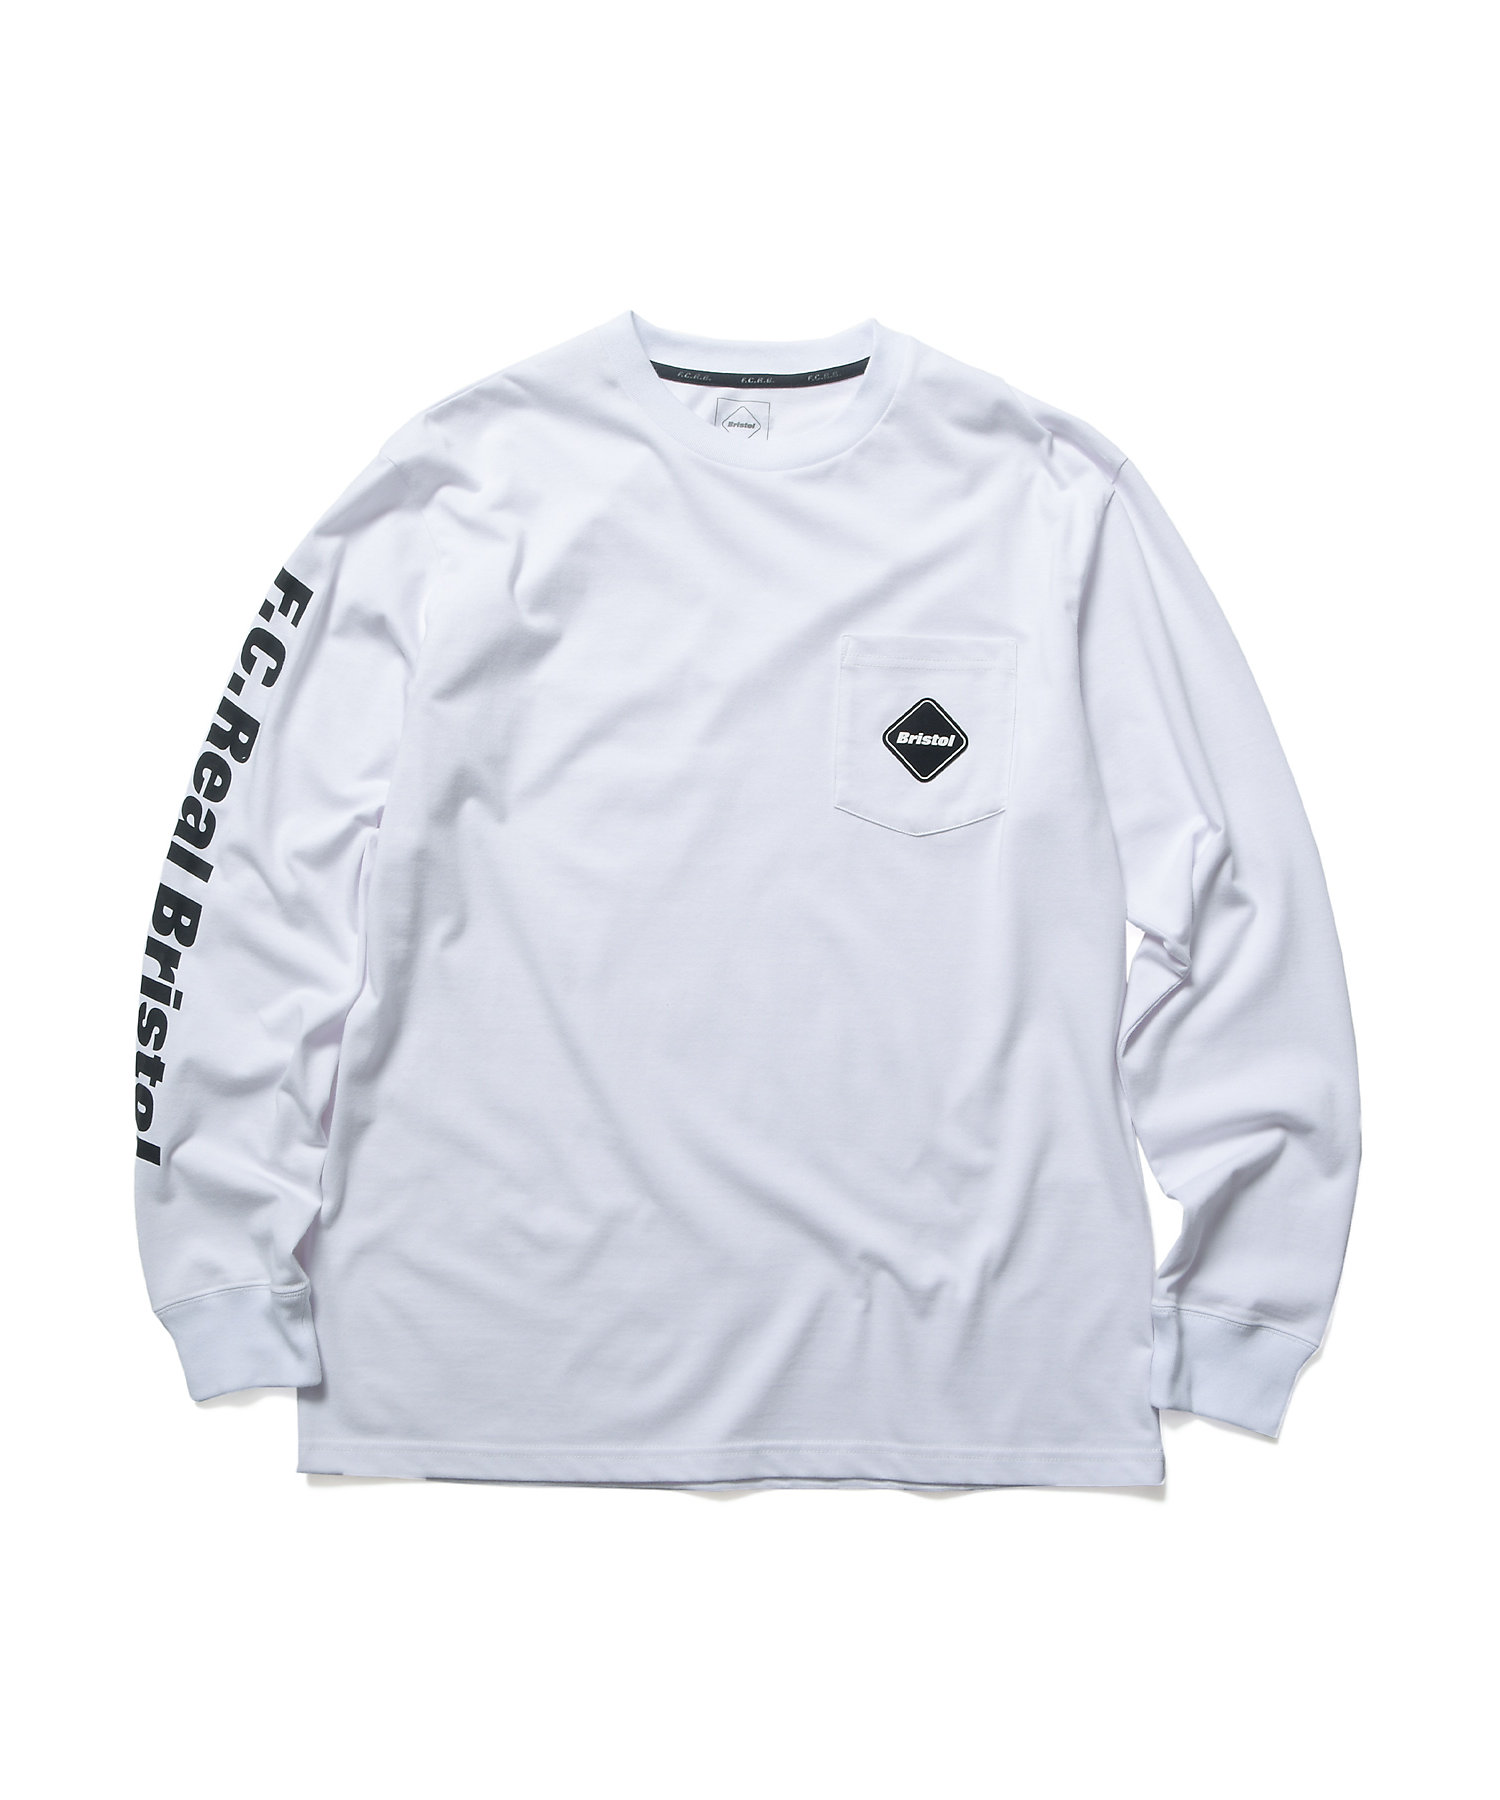 XL FCRB L/S AUTHENTIC TEAM POCKET TEE-